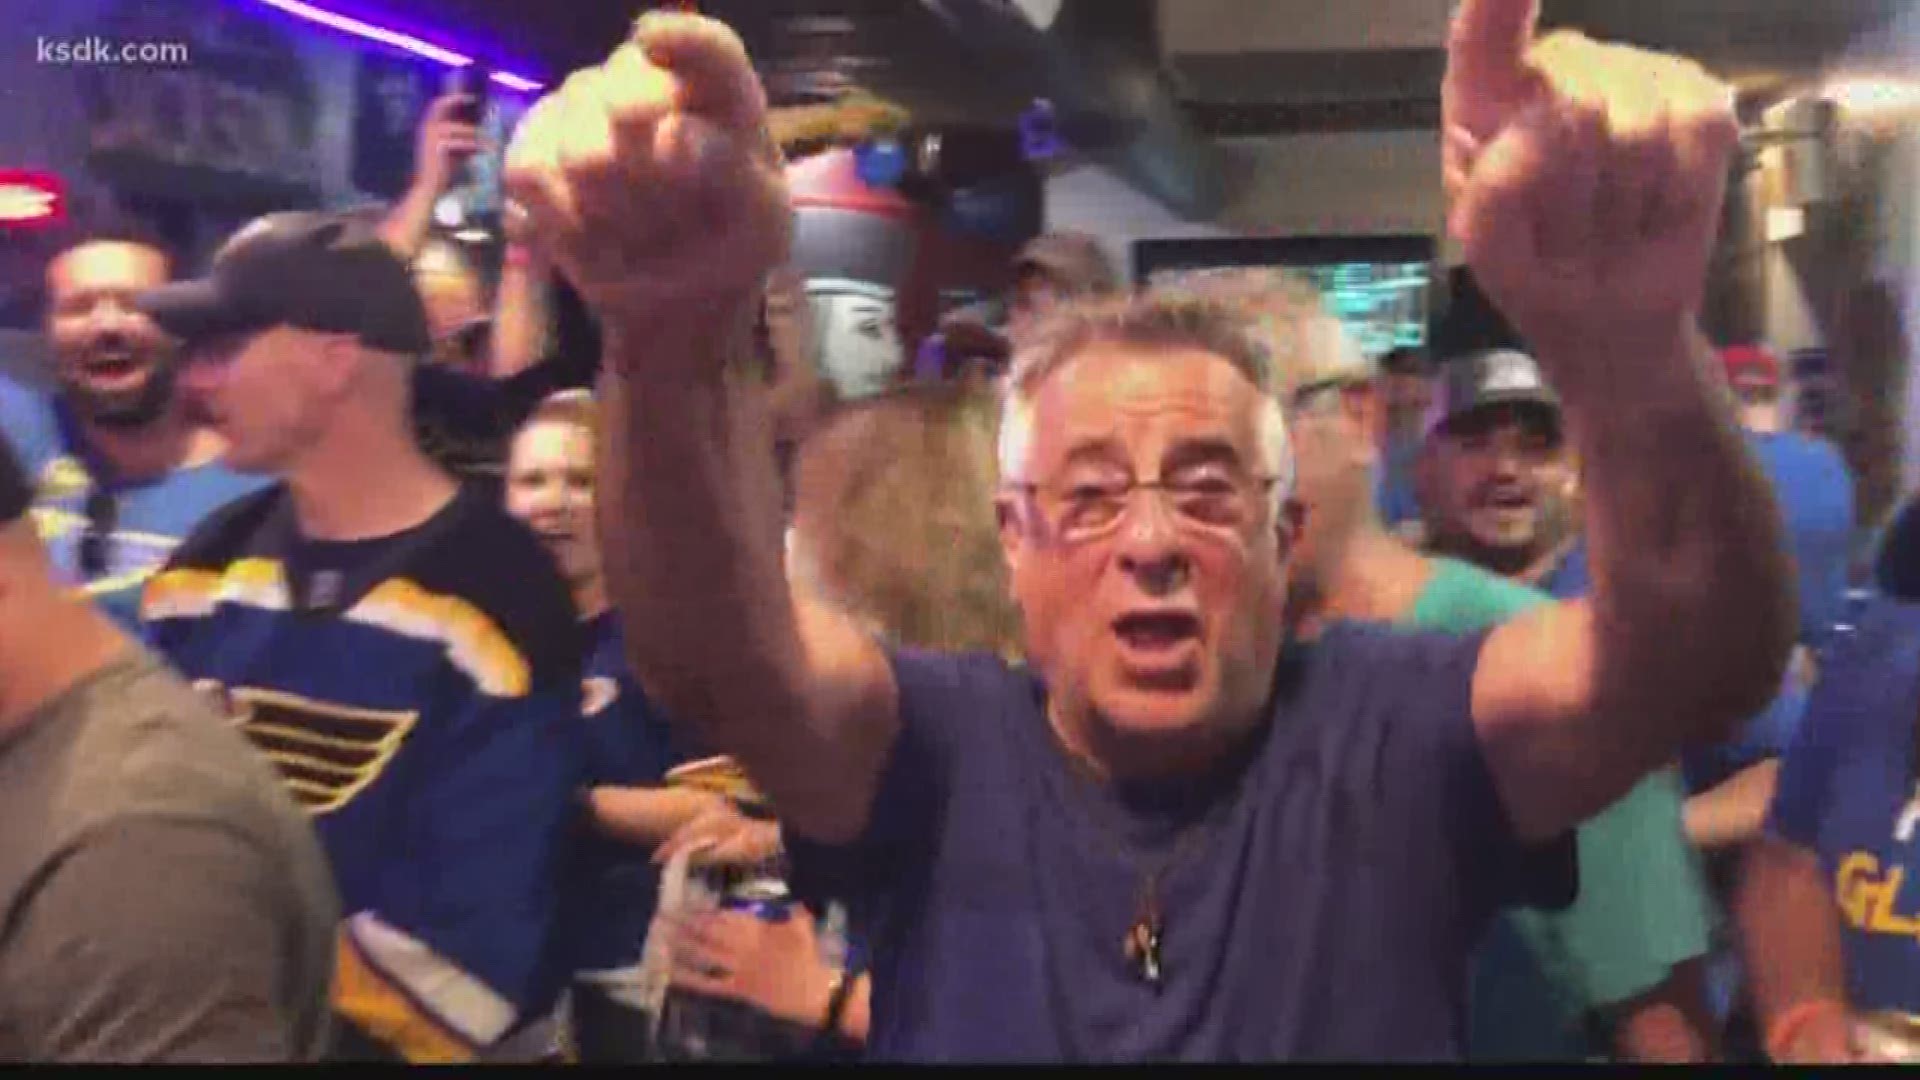 When Alexander Steen, Joel Edmundson, Jaden Schwartz, Robert Bortuzzo and Robby Fabbri walked into The Jacks NYB Clubhouse in Philadelphia, little did they know they'd walk out with the Blues' new victory song.